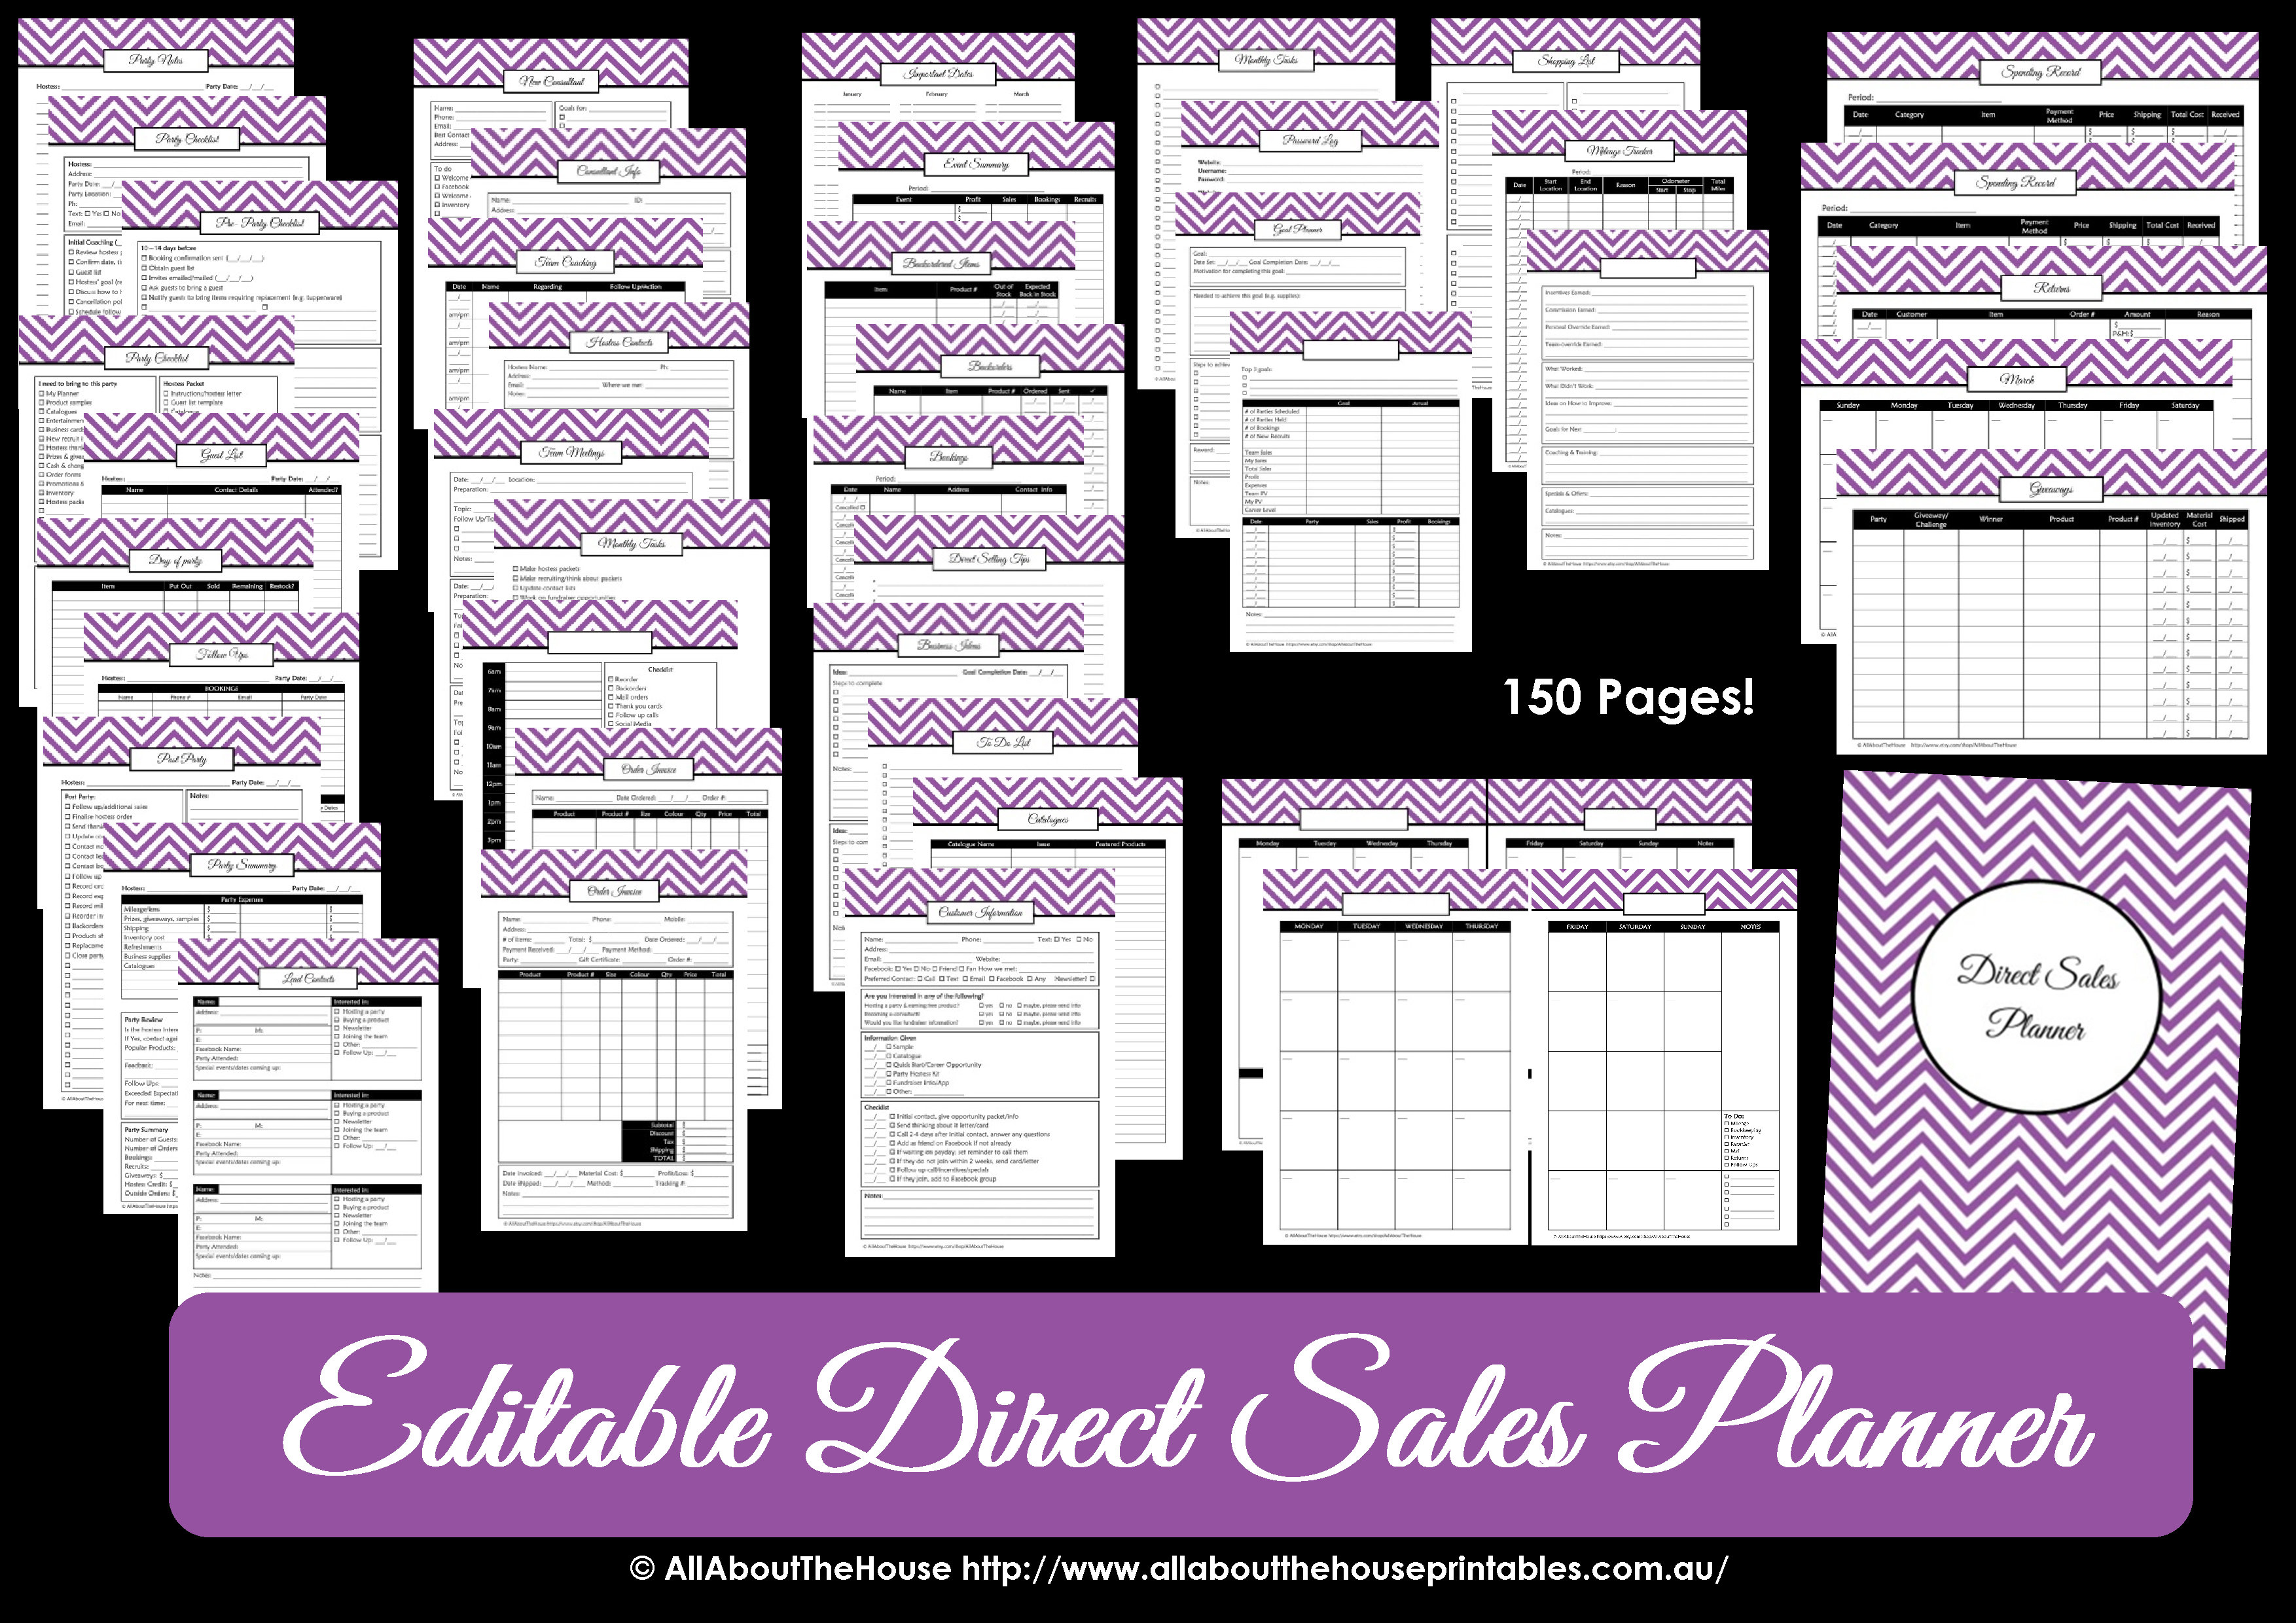 editable direct sales printable planner editable chevron thirty one origami owl scentsy mary kay organize pdf work at home self employed